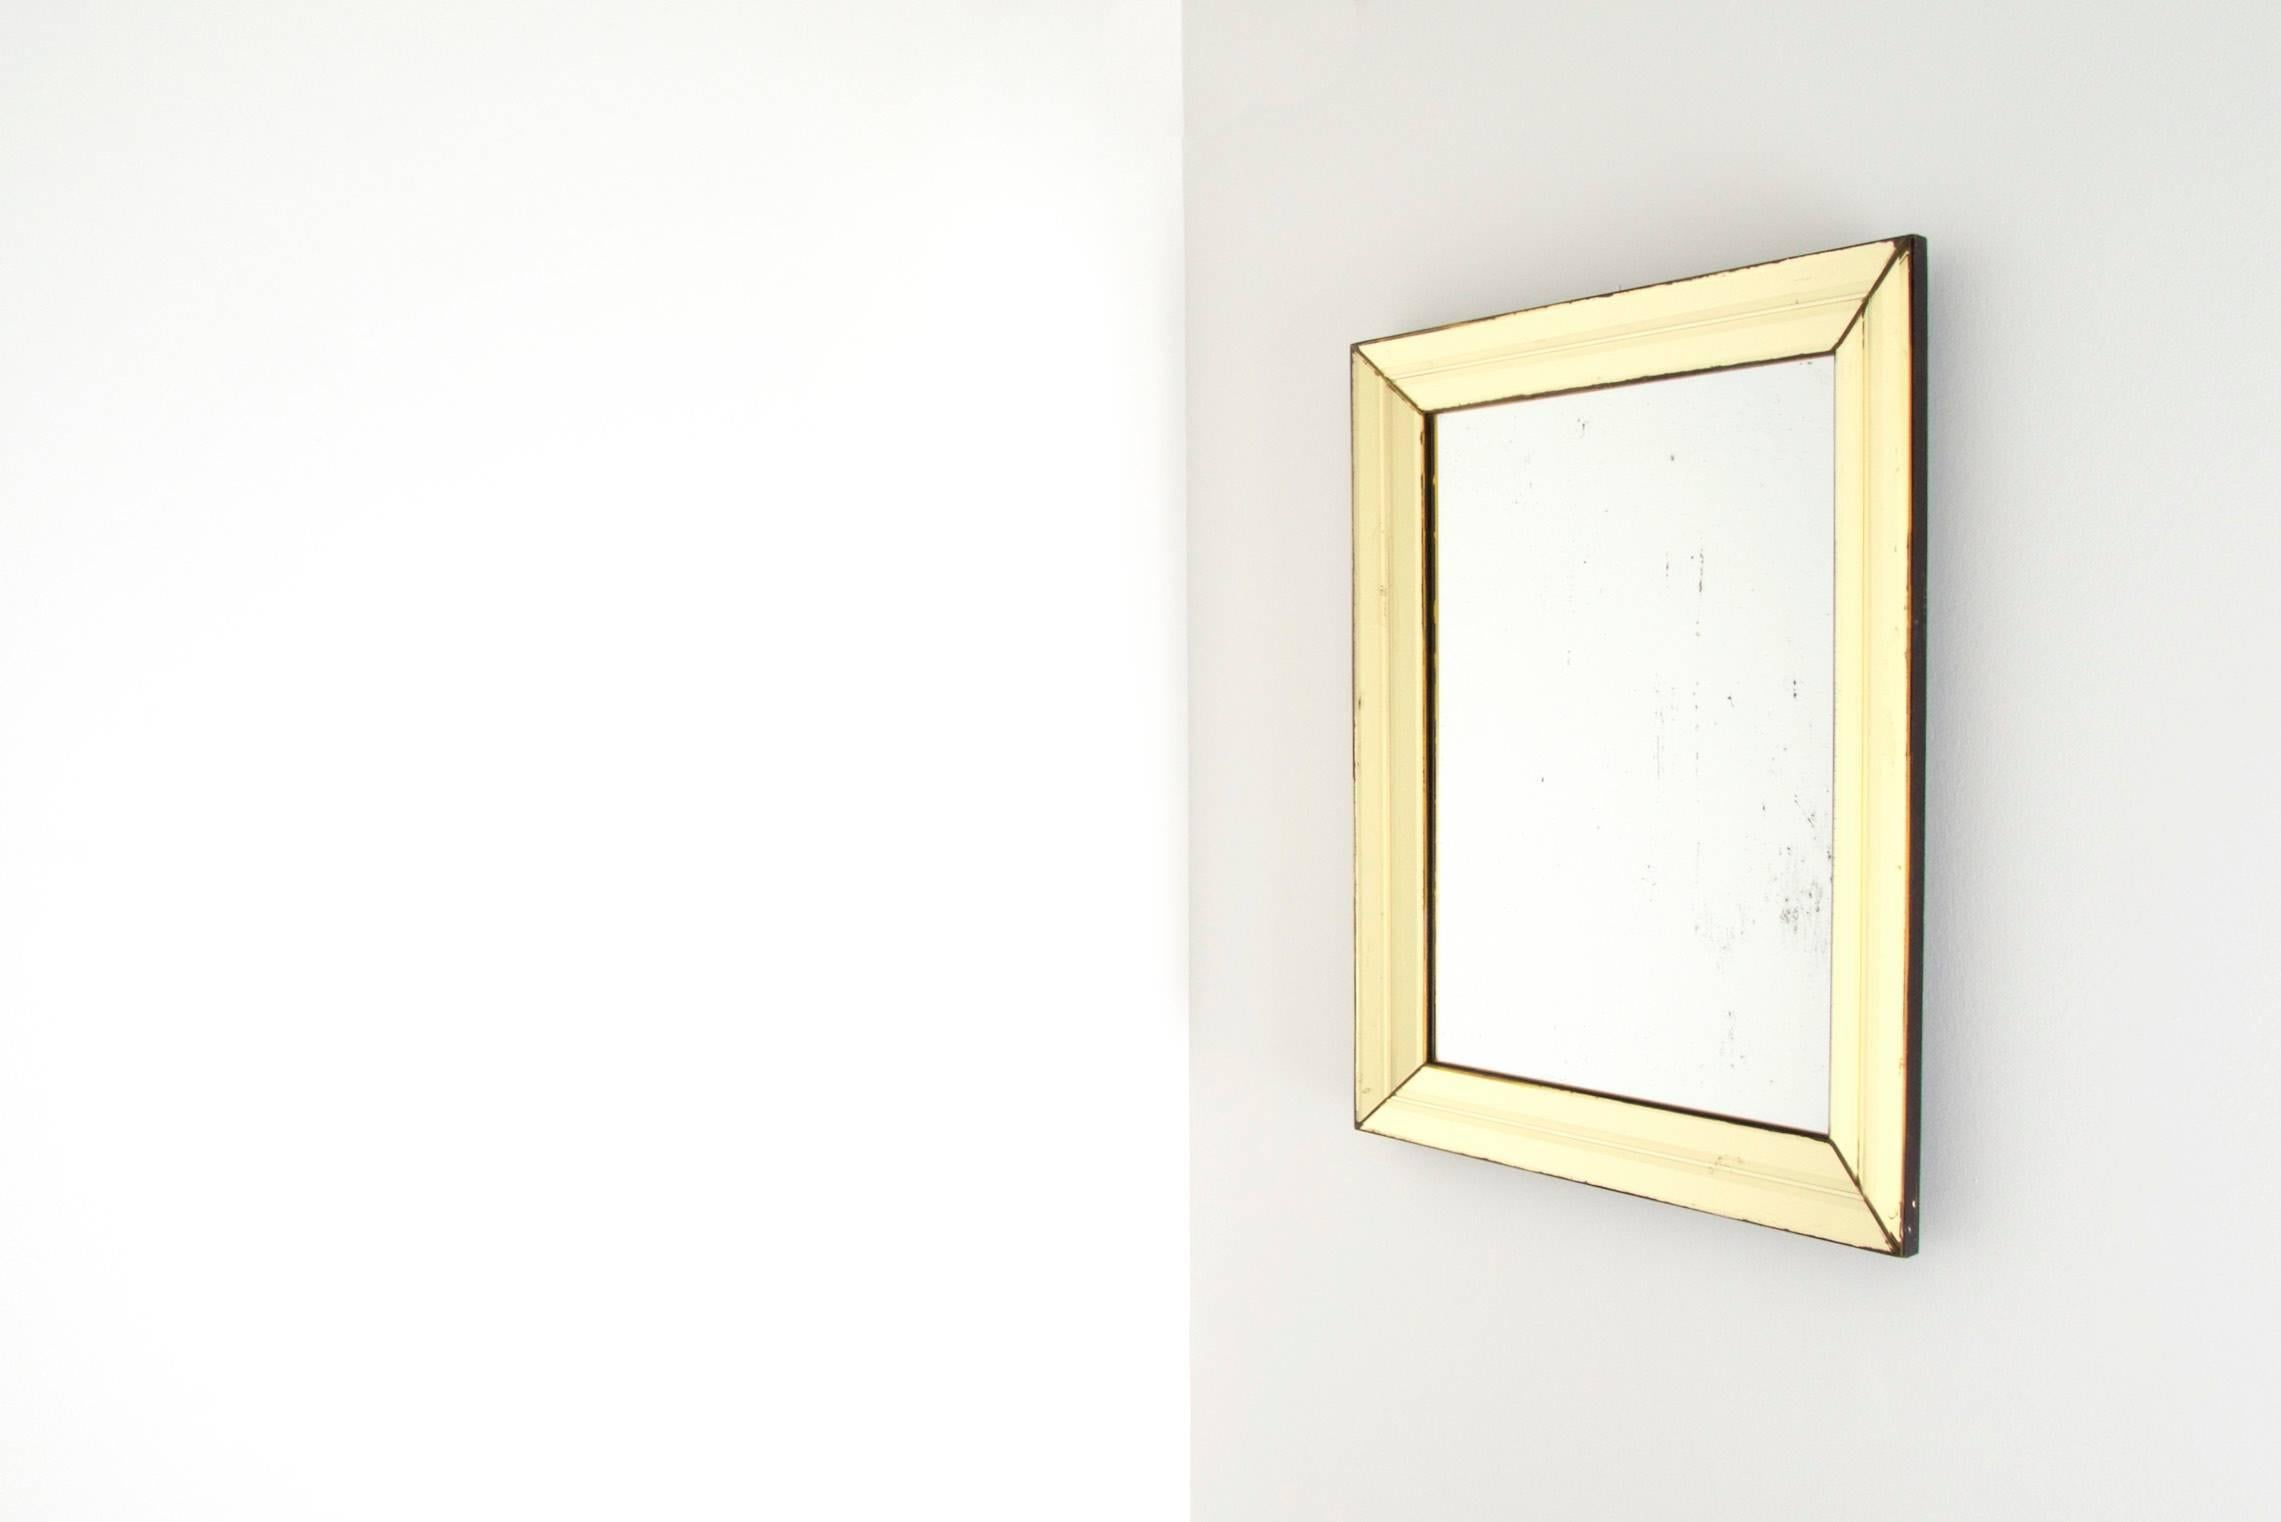 Fontana Arte, yellow glass mirror, circa 1950.
The base of the mirror is in hard wood. The frame is covered in convex with four yellow colored mirrors engraved with straight lines.
Some chips on the yellow glasses. Stain on the mirror. The